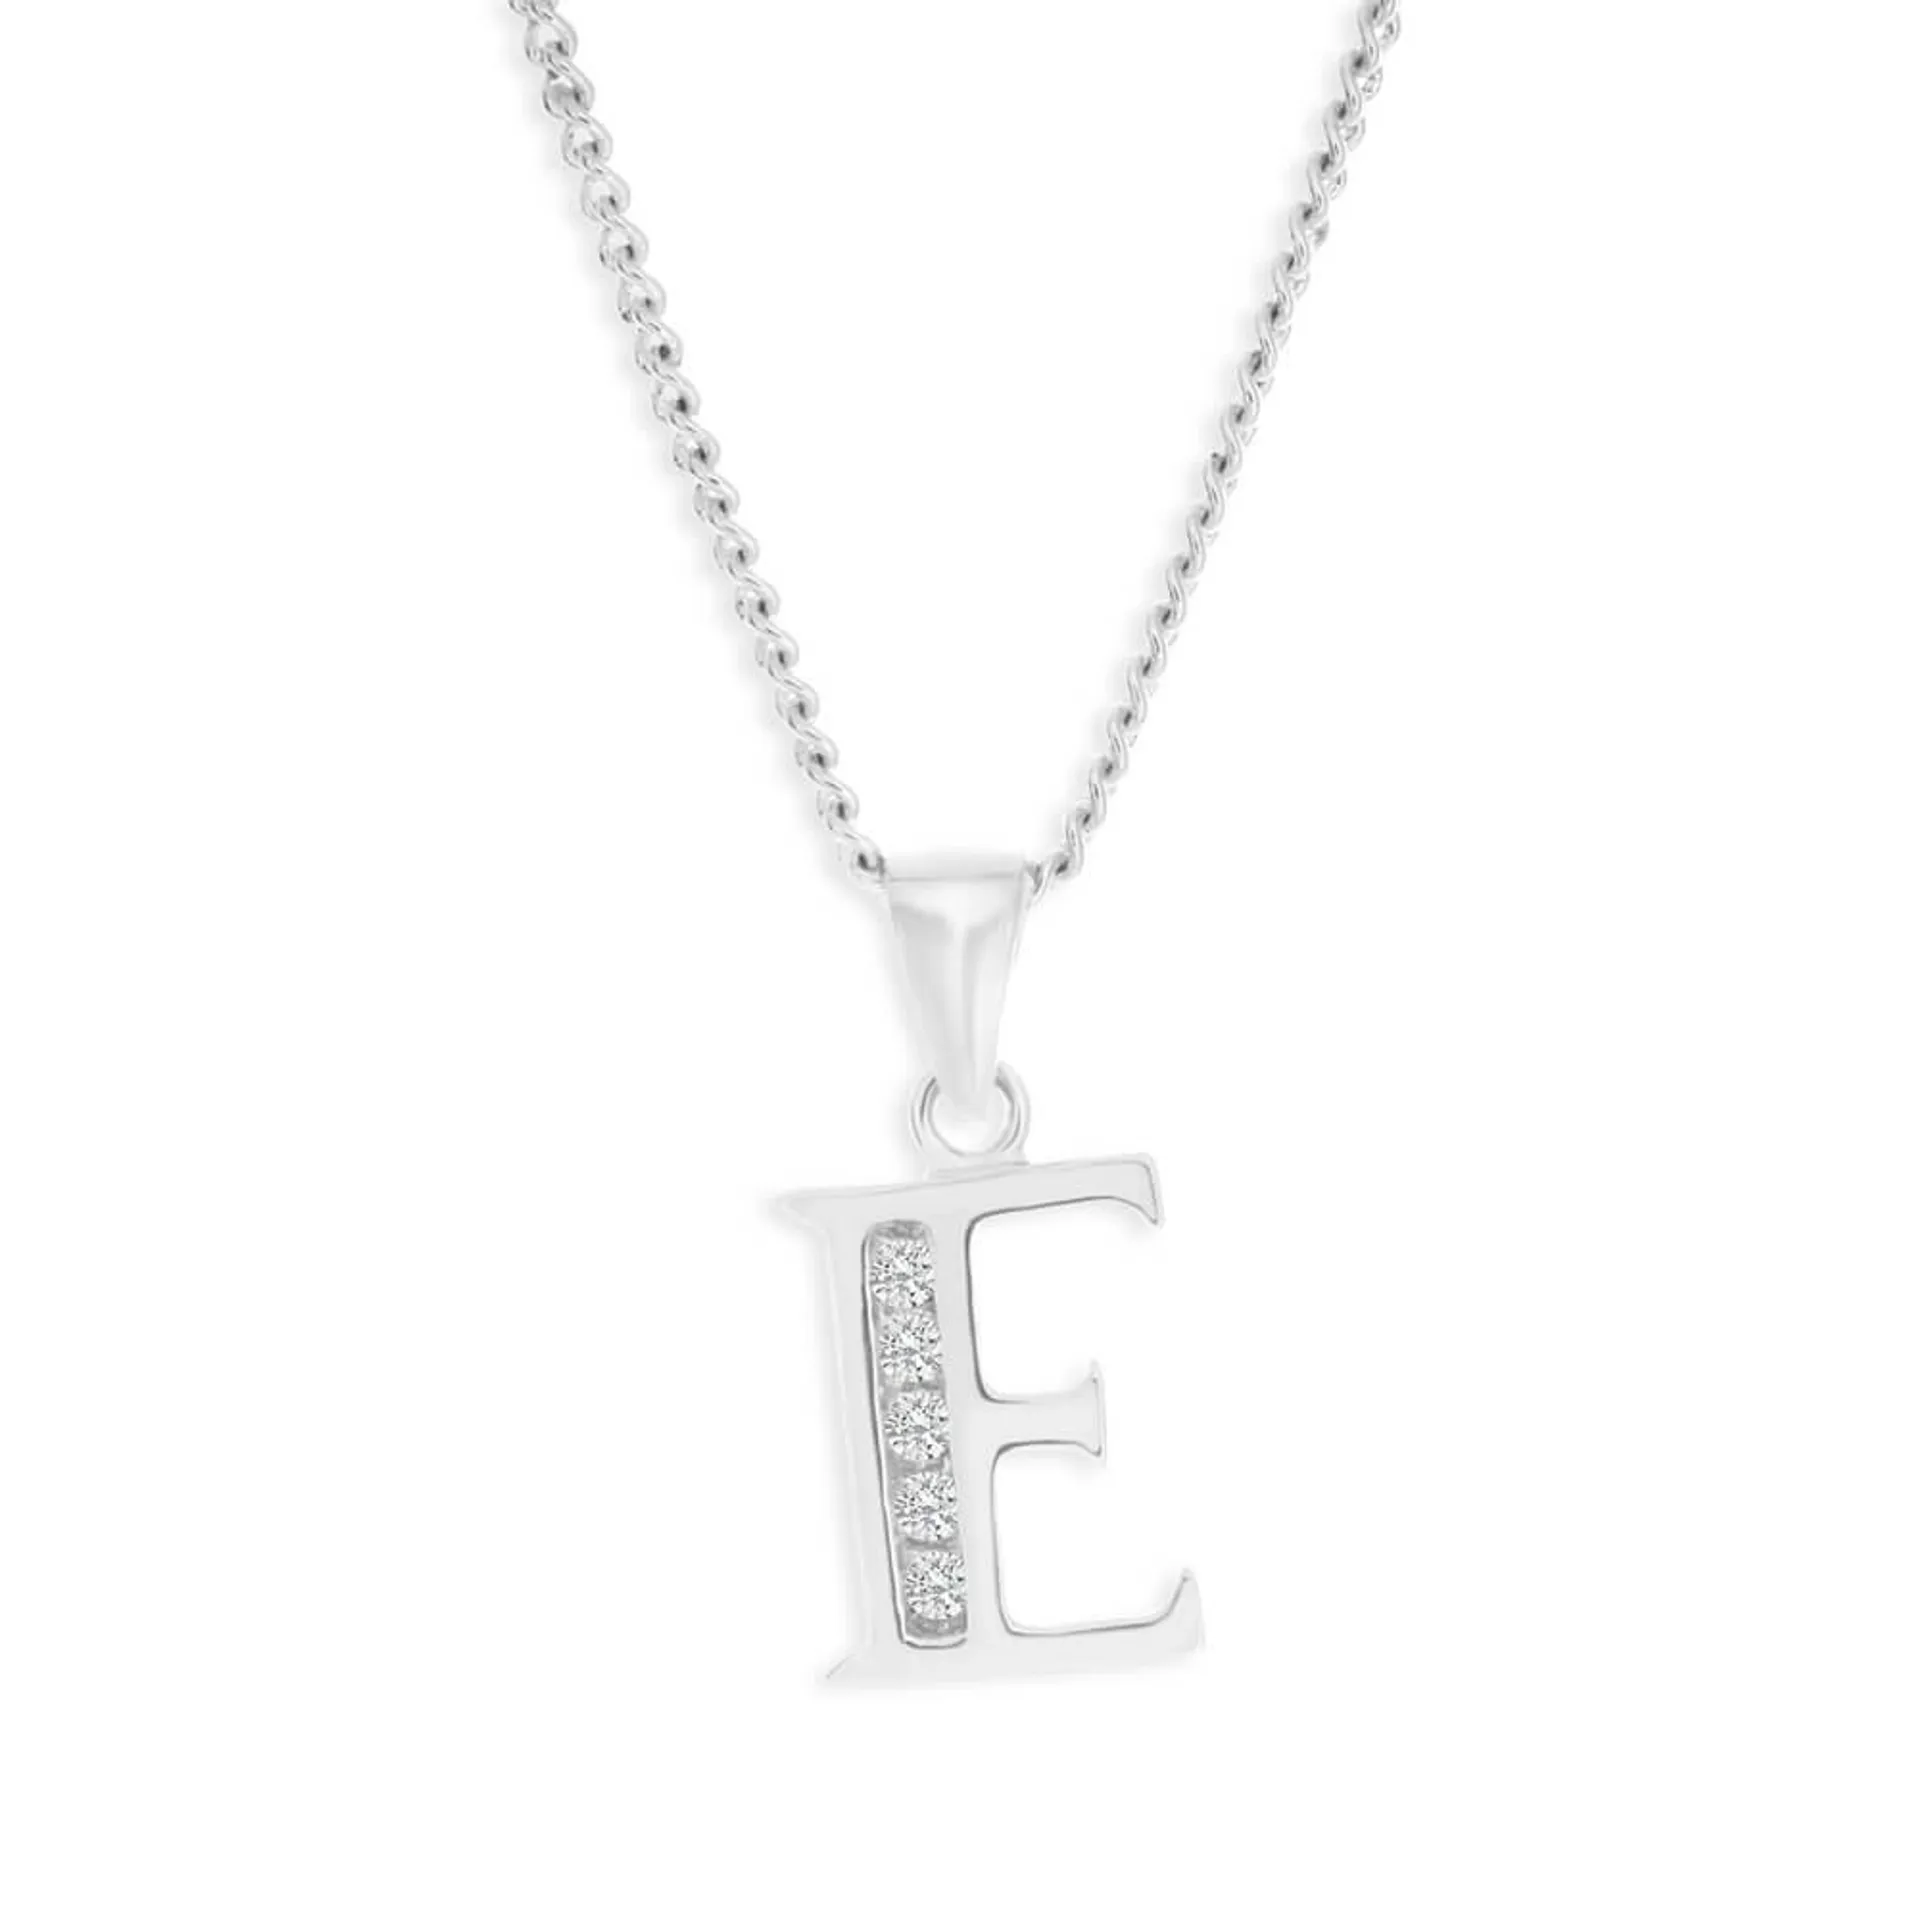 Sterling Silver Cubic Zirconia Initial "E" Pendant